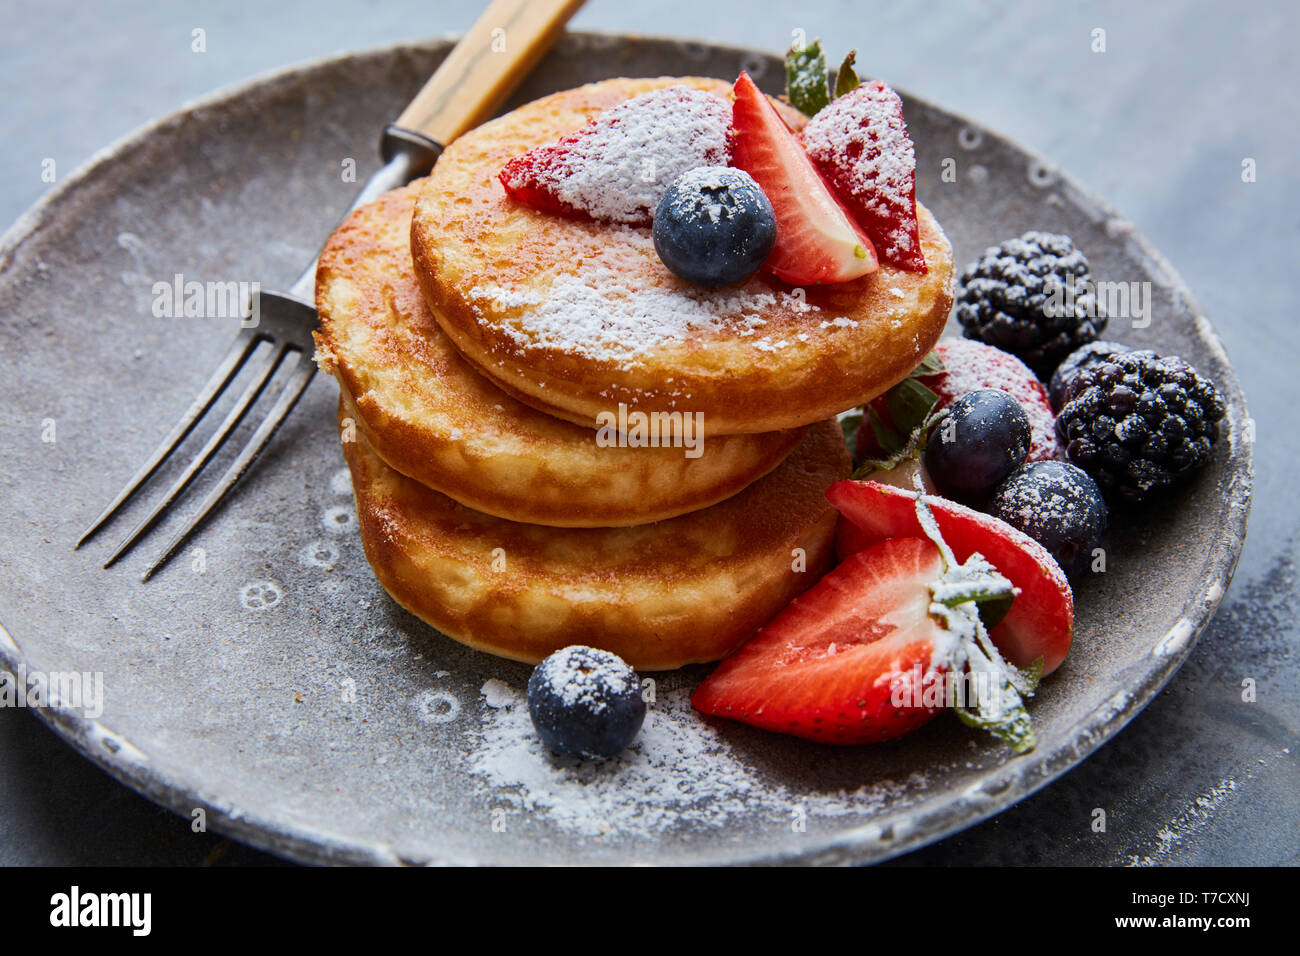 Fresh brunch pancakes with berries Stock Photo